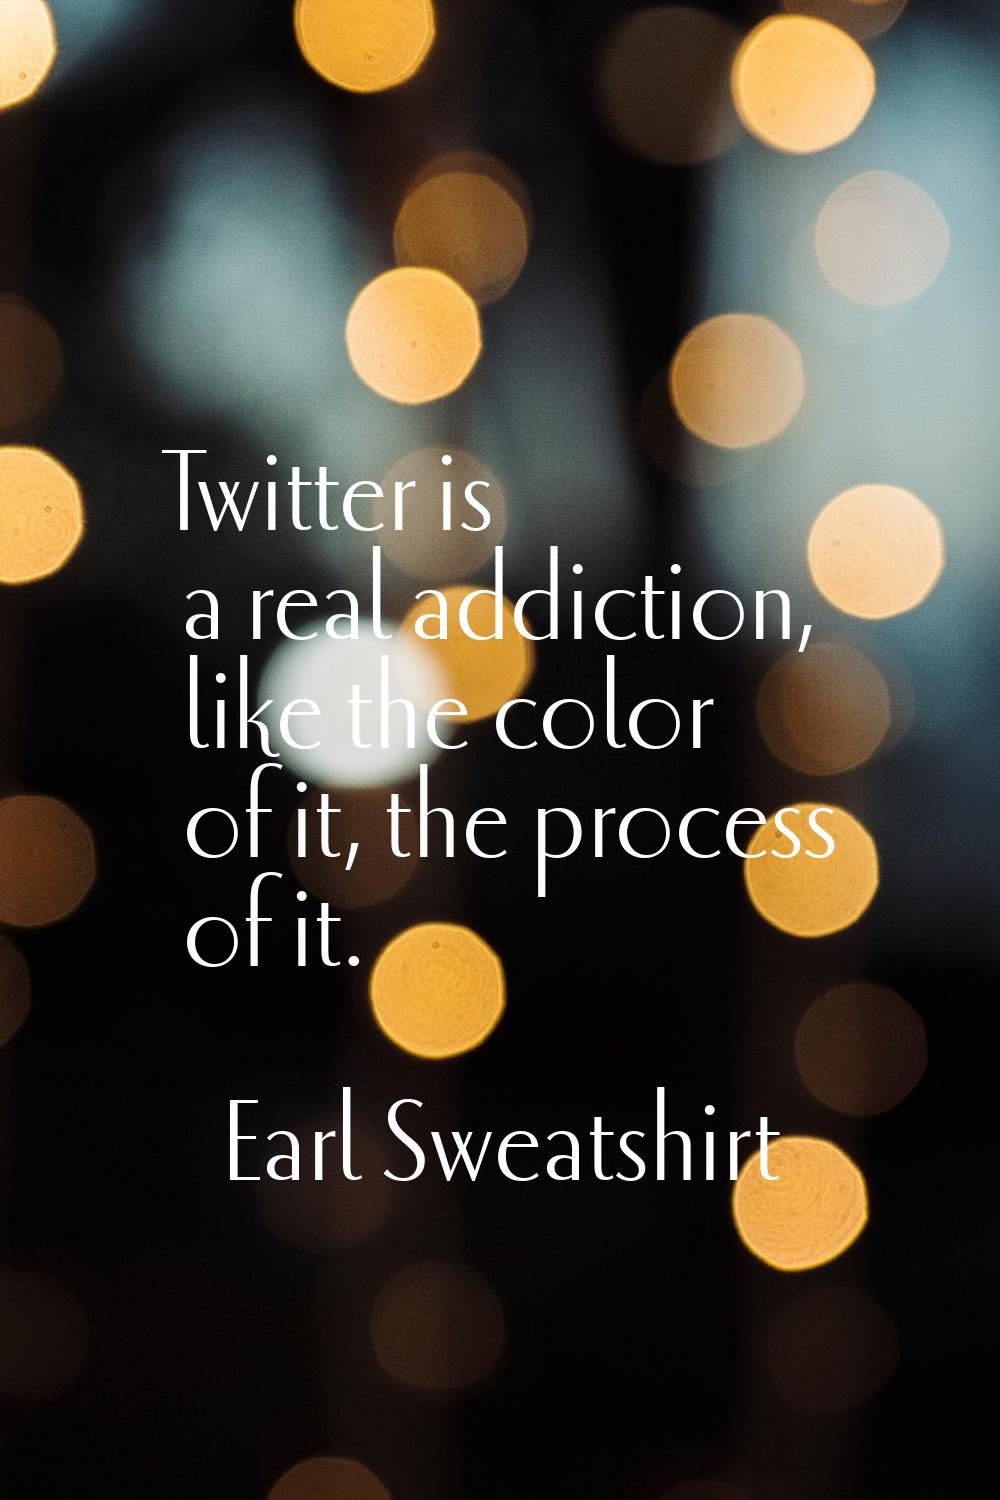 Twitter is a real addiction, like the color of it, the process of it.